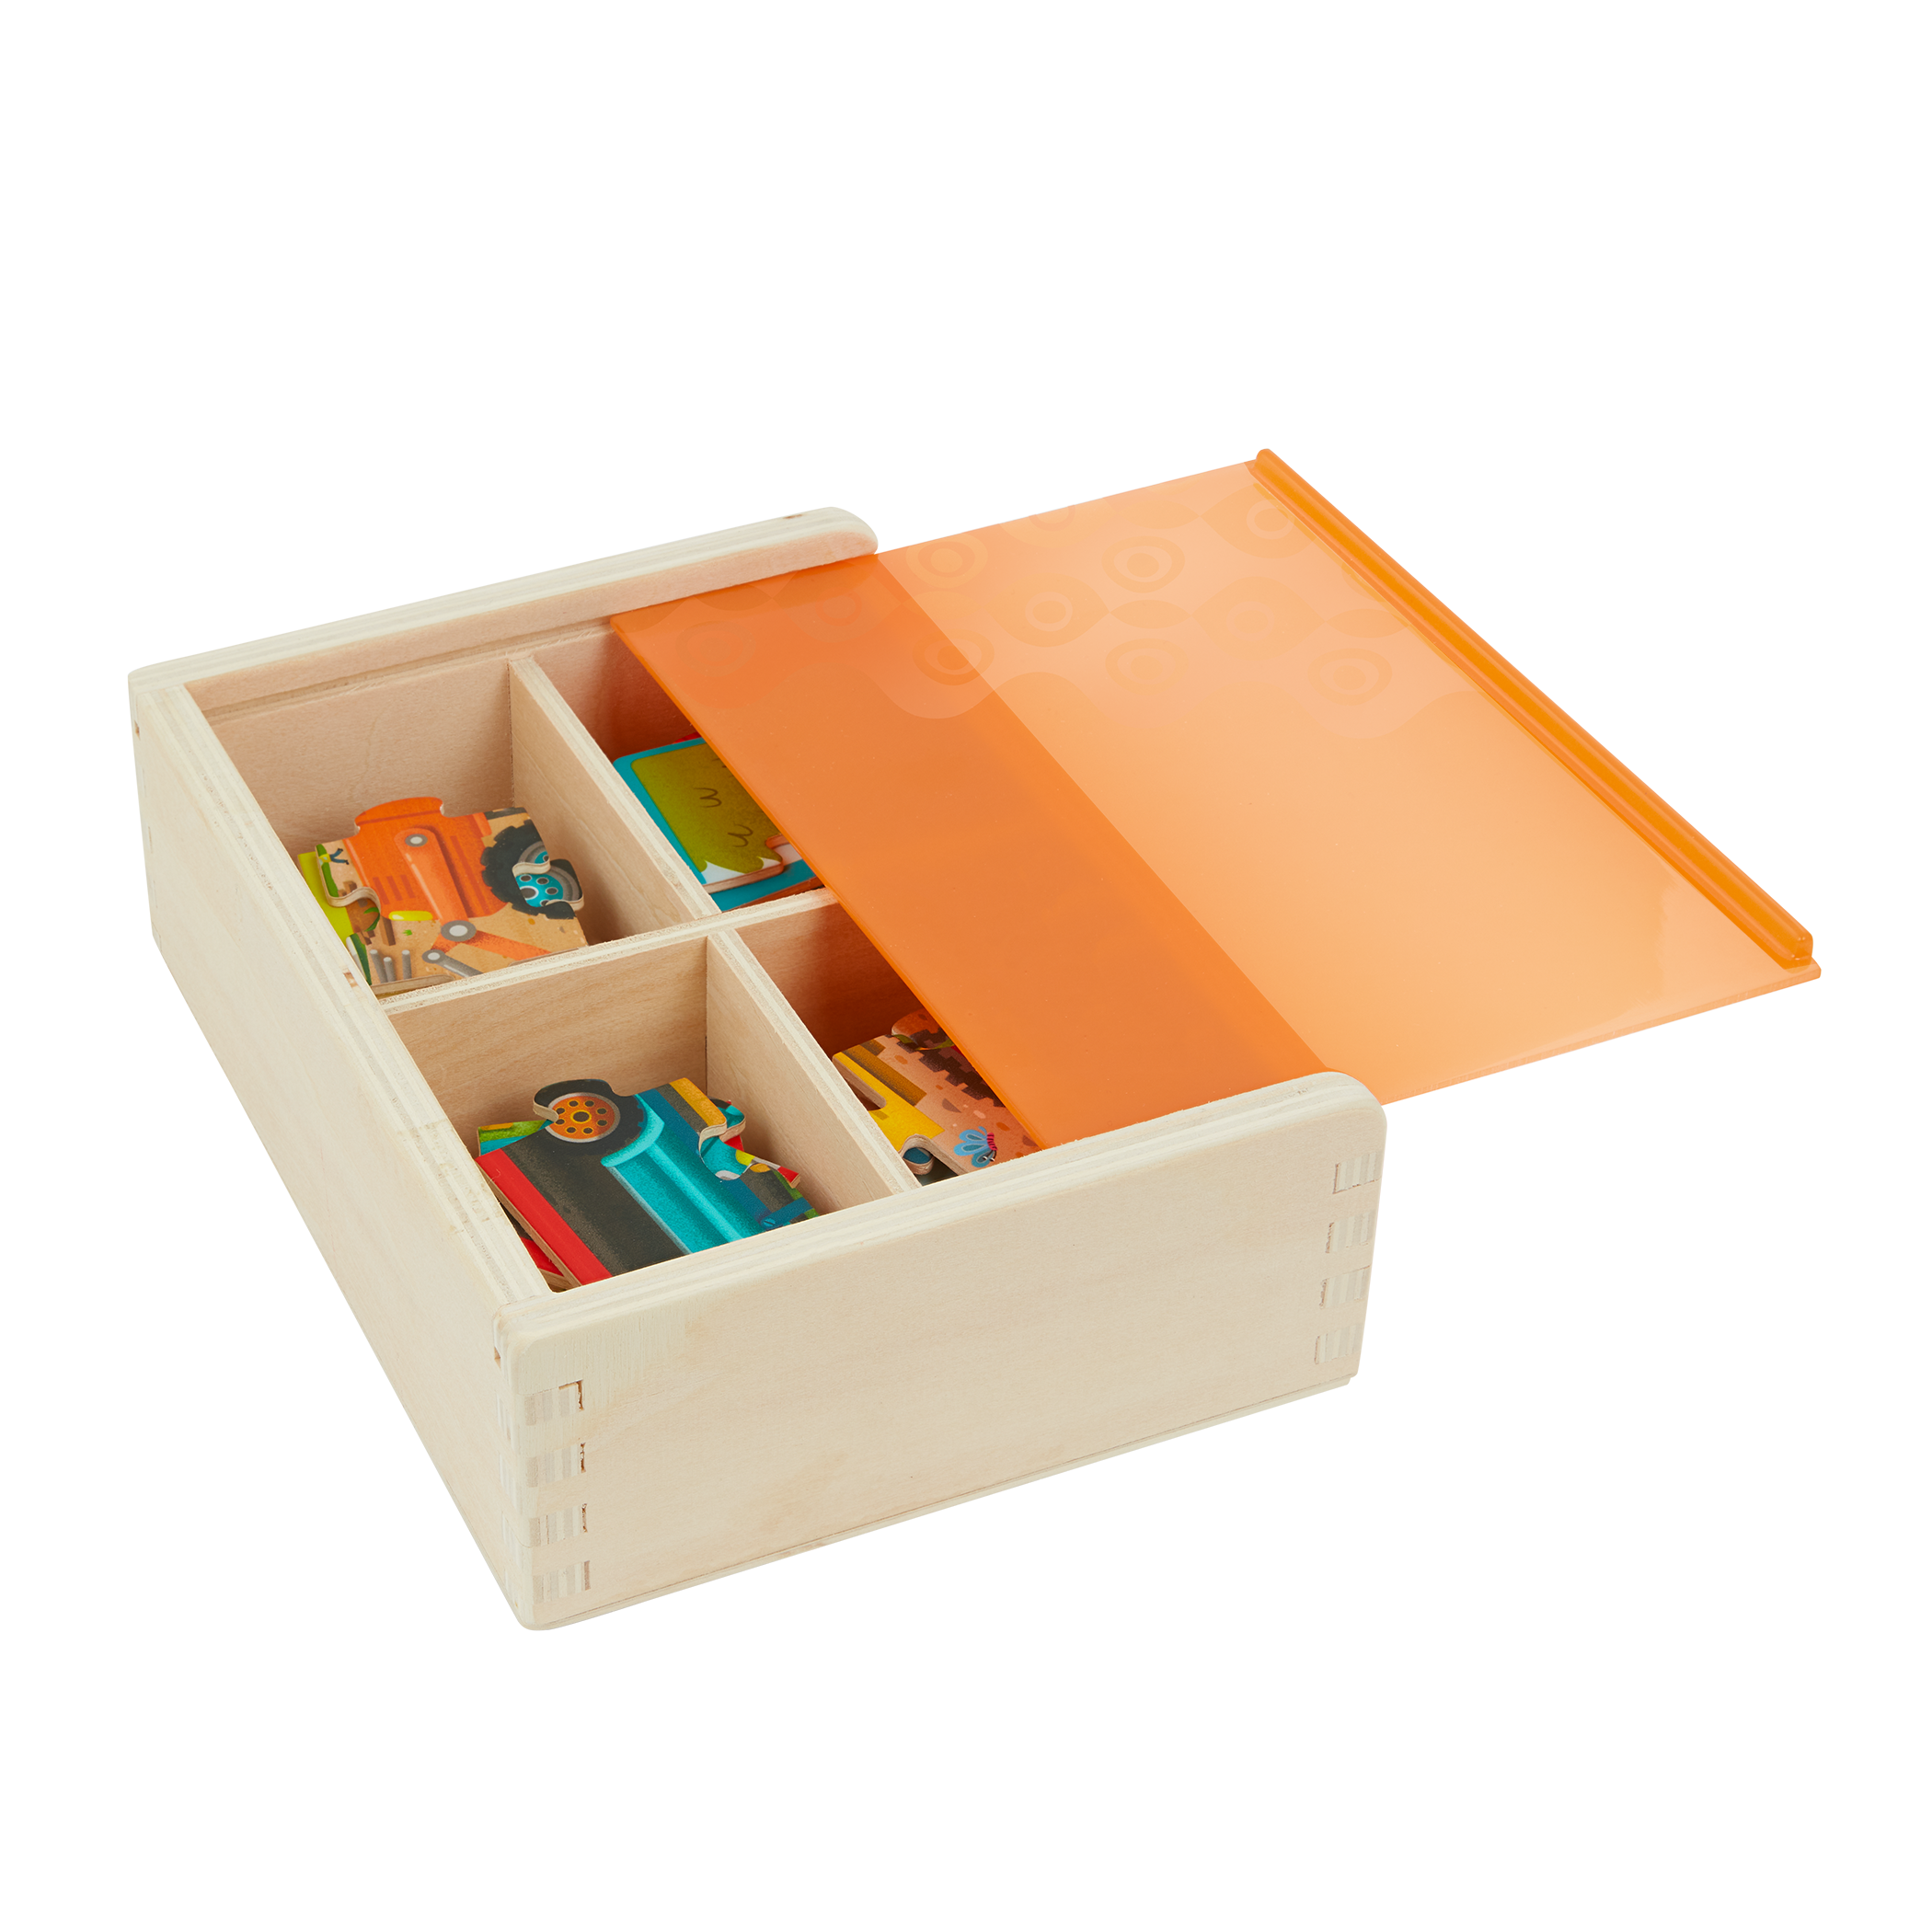 Wooden Jigsaw Organisers with Drawers - Innovations